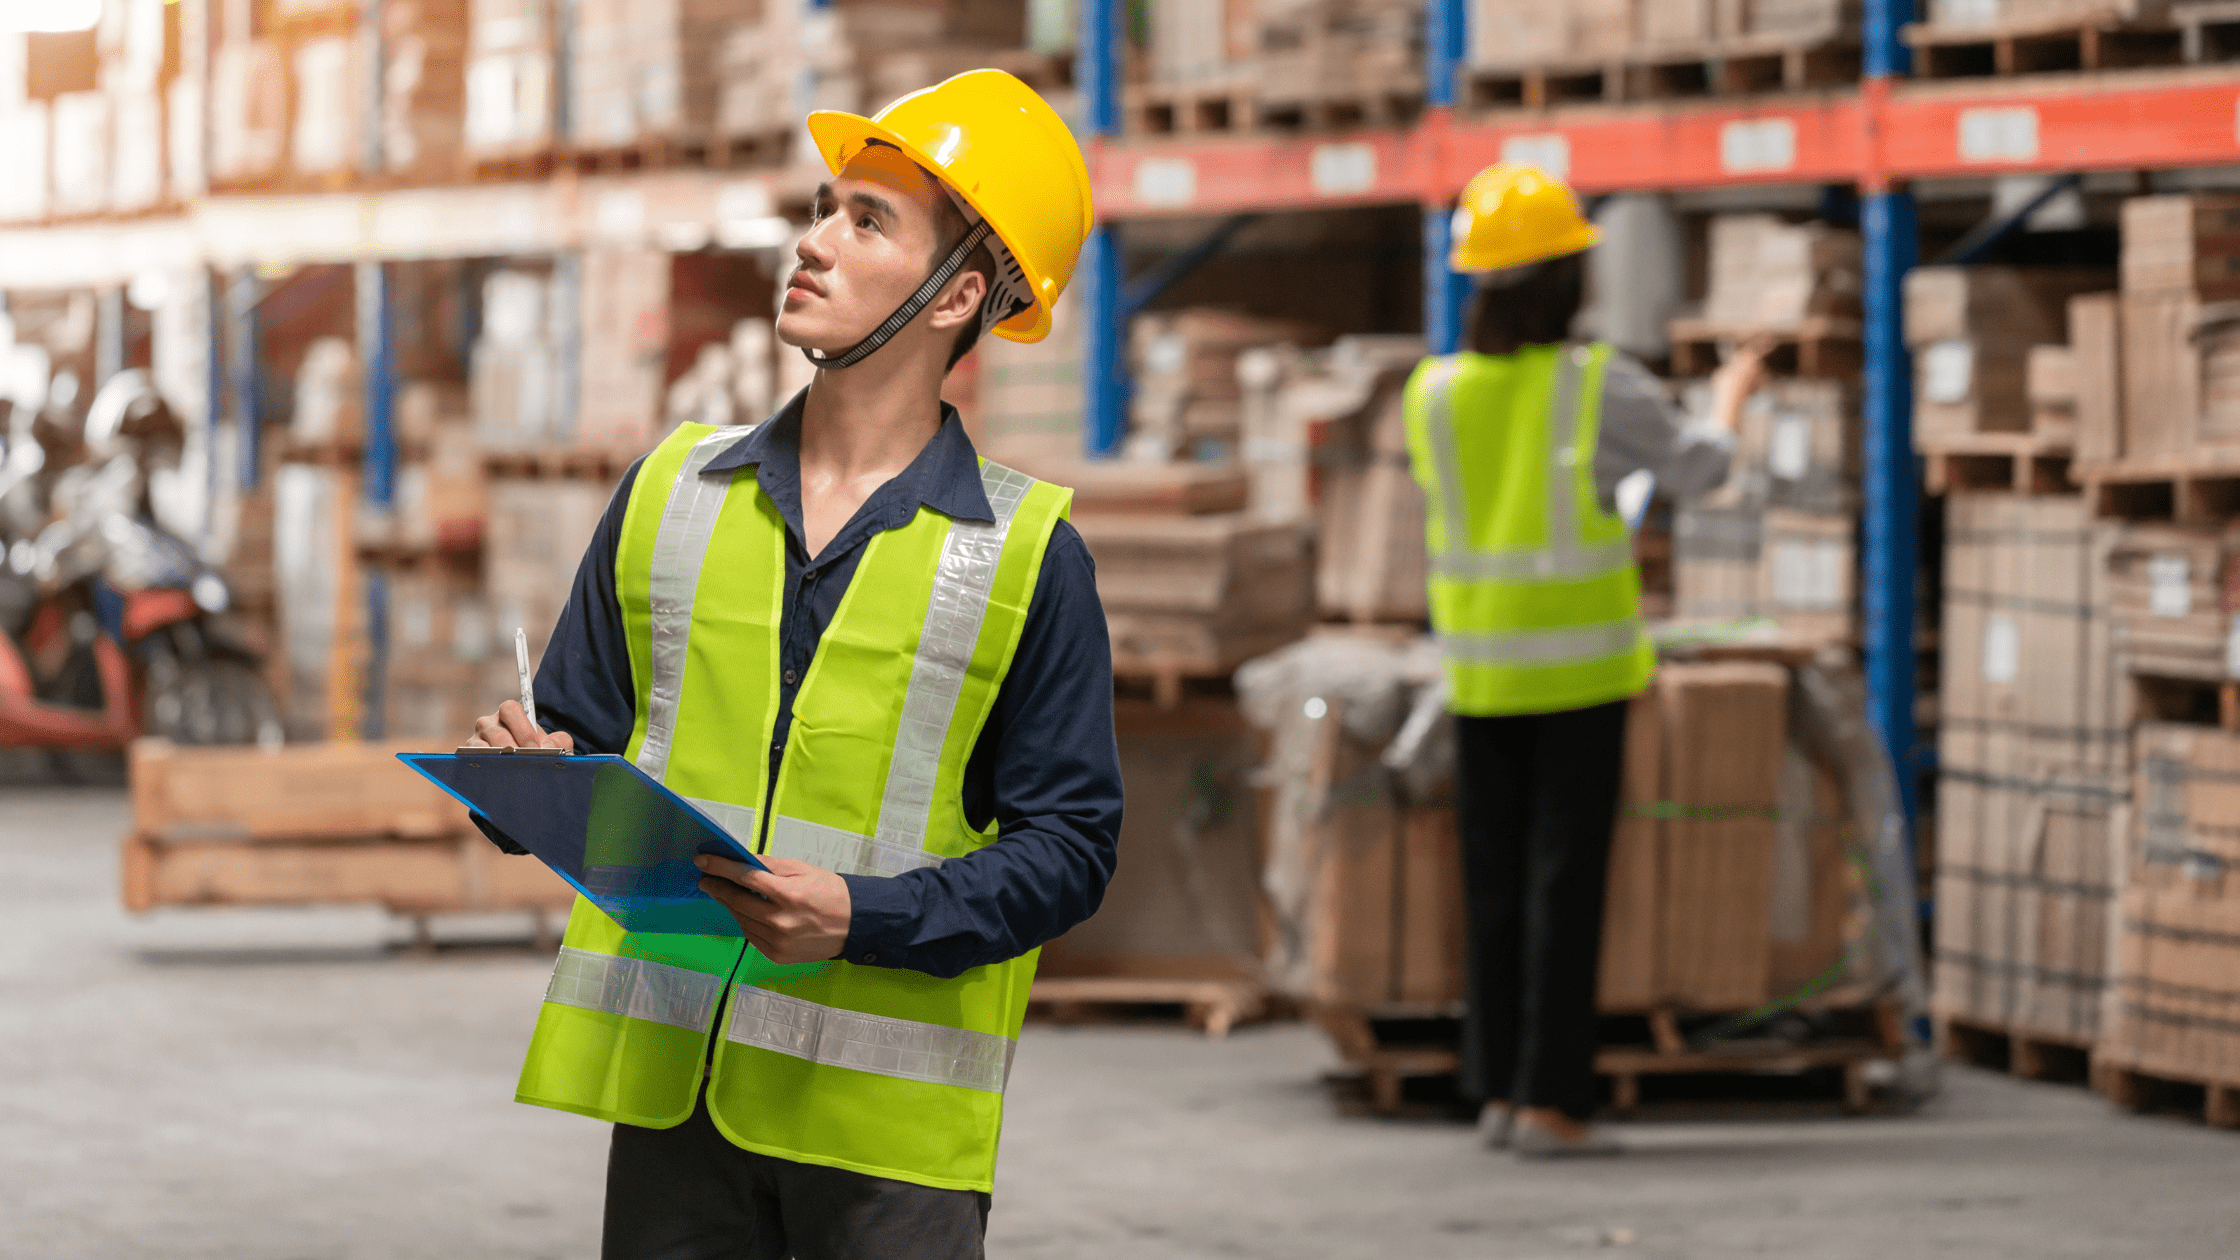 Warehouse organization workers and checklists